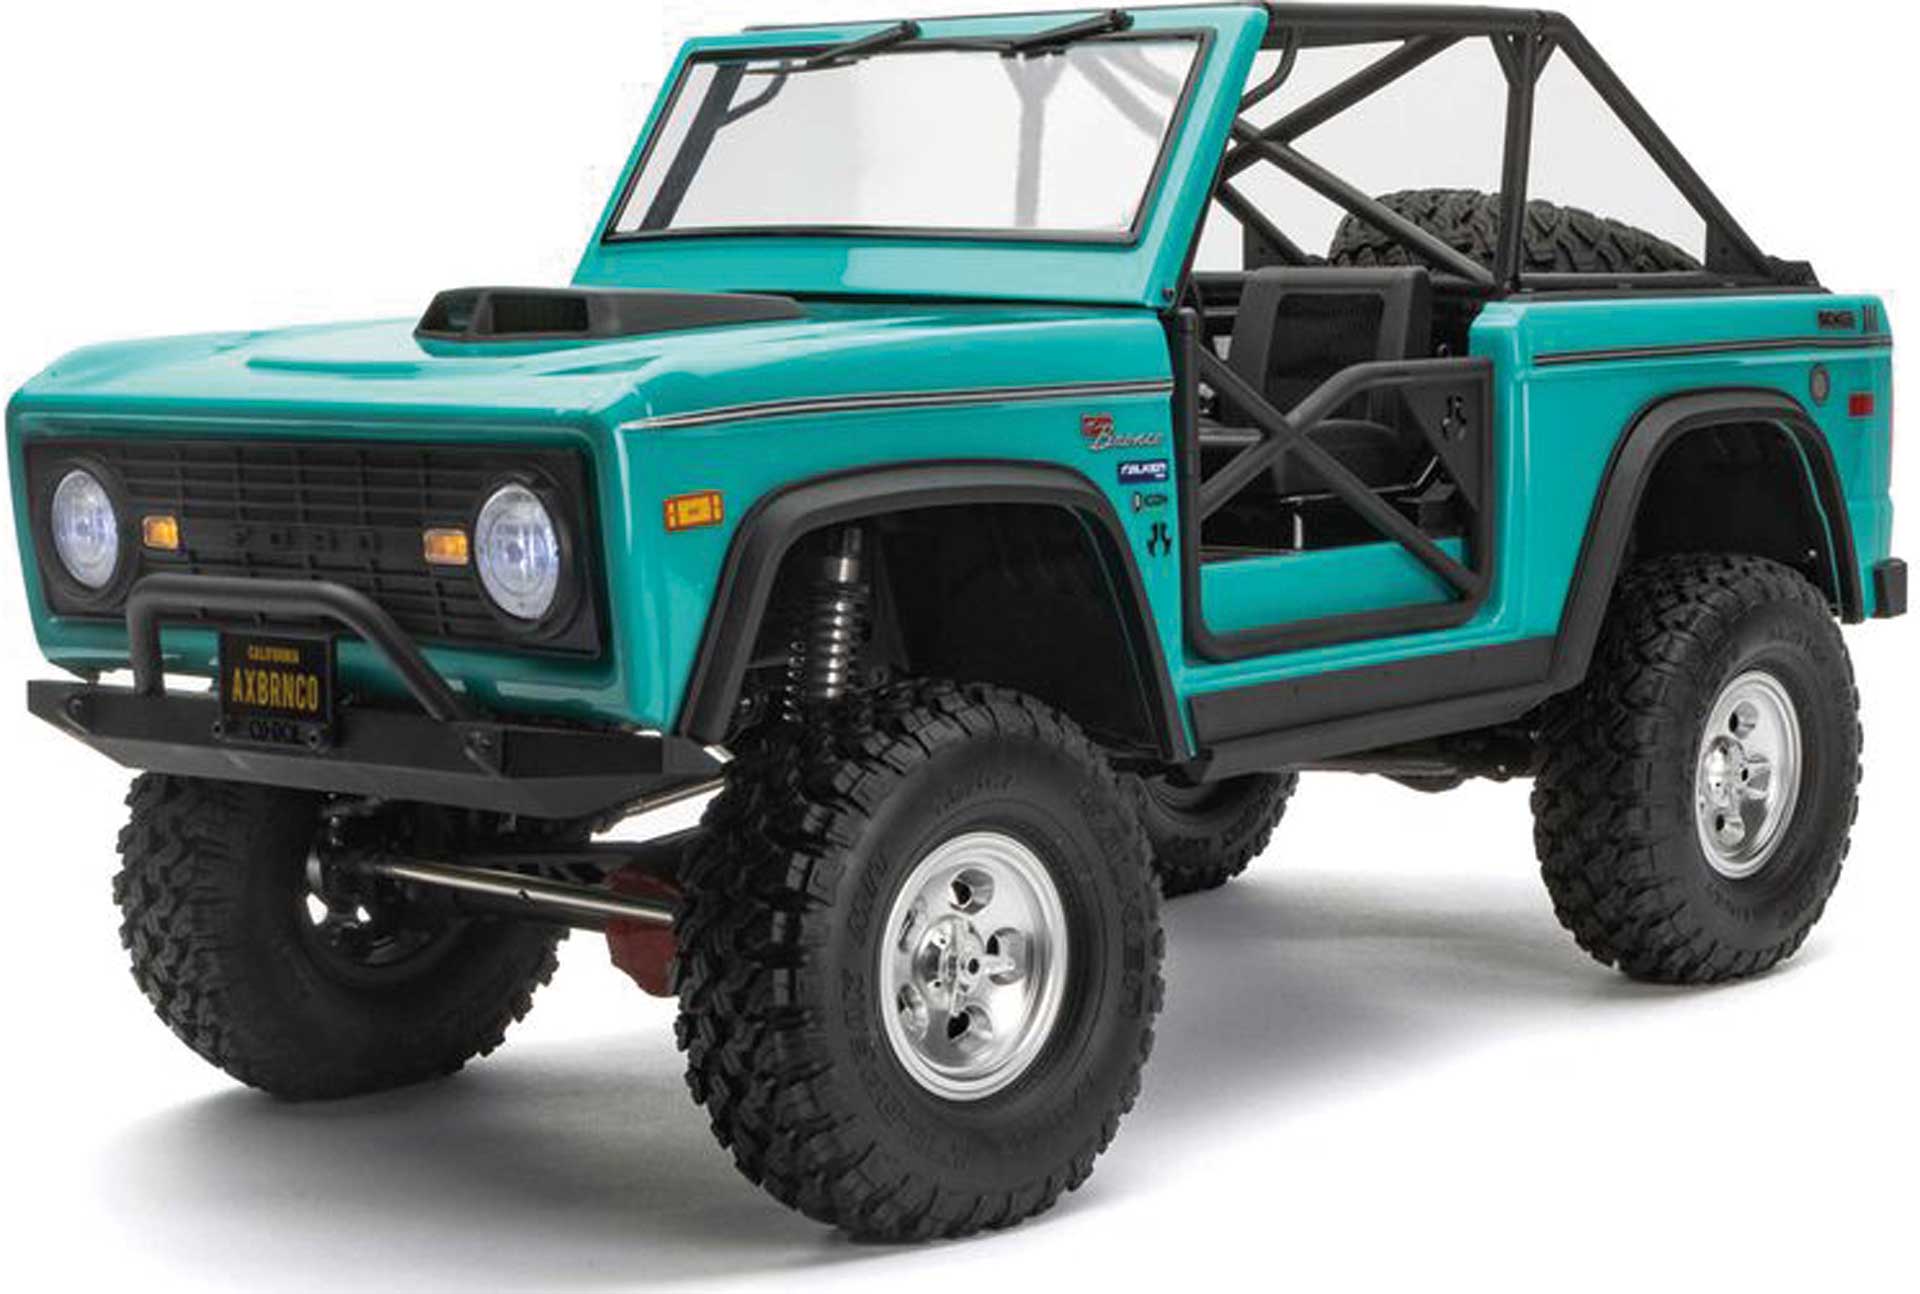 AXIAL SCX10 III Early Ford Bronco 1/10ème 4wd RTR (Teal)